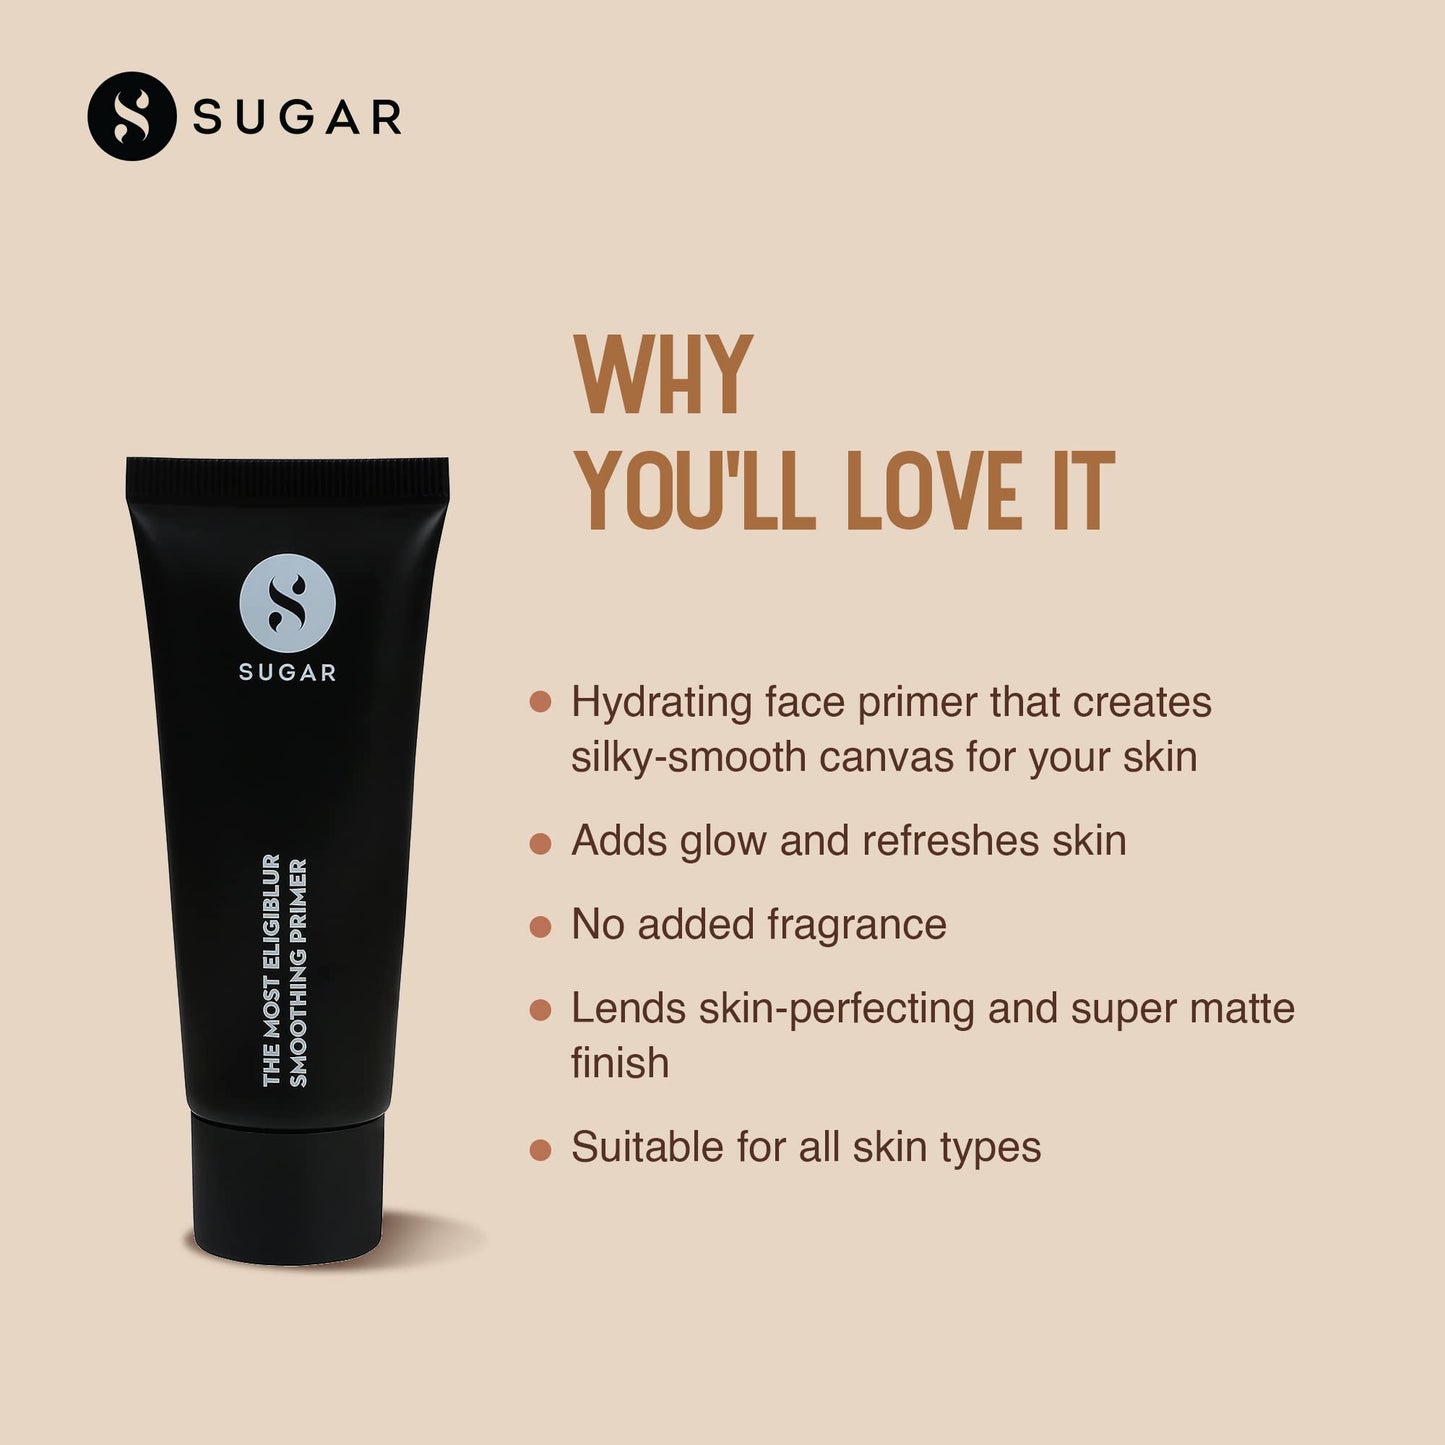 SUGAR Cosmetics - The Most Eligiblur - Smoothing Primer - Full Coverage Primer with Super Matte Finish, Cream Finish Primer, Suitable for All Skin Types  from SUGAR Cosmetics